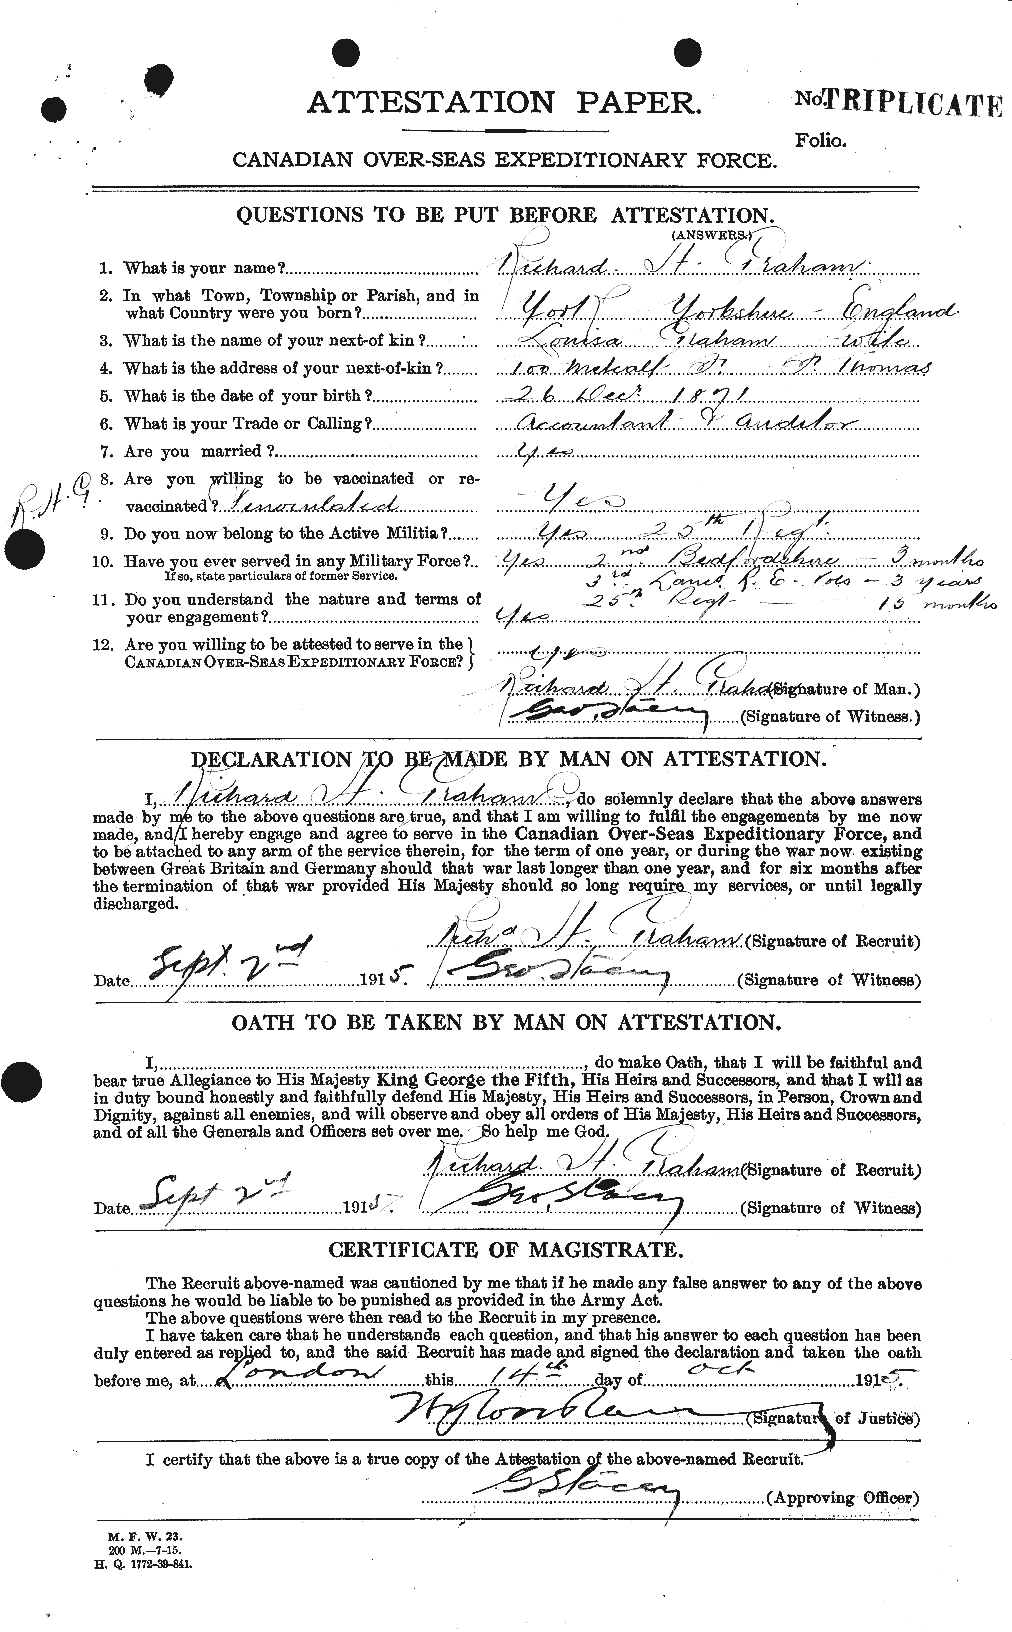 Personnel Records of the First World War - CEF 359369a